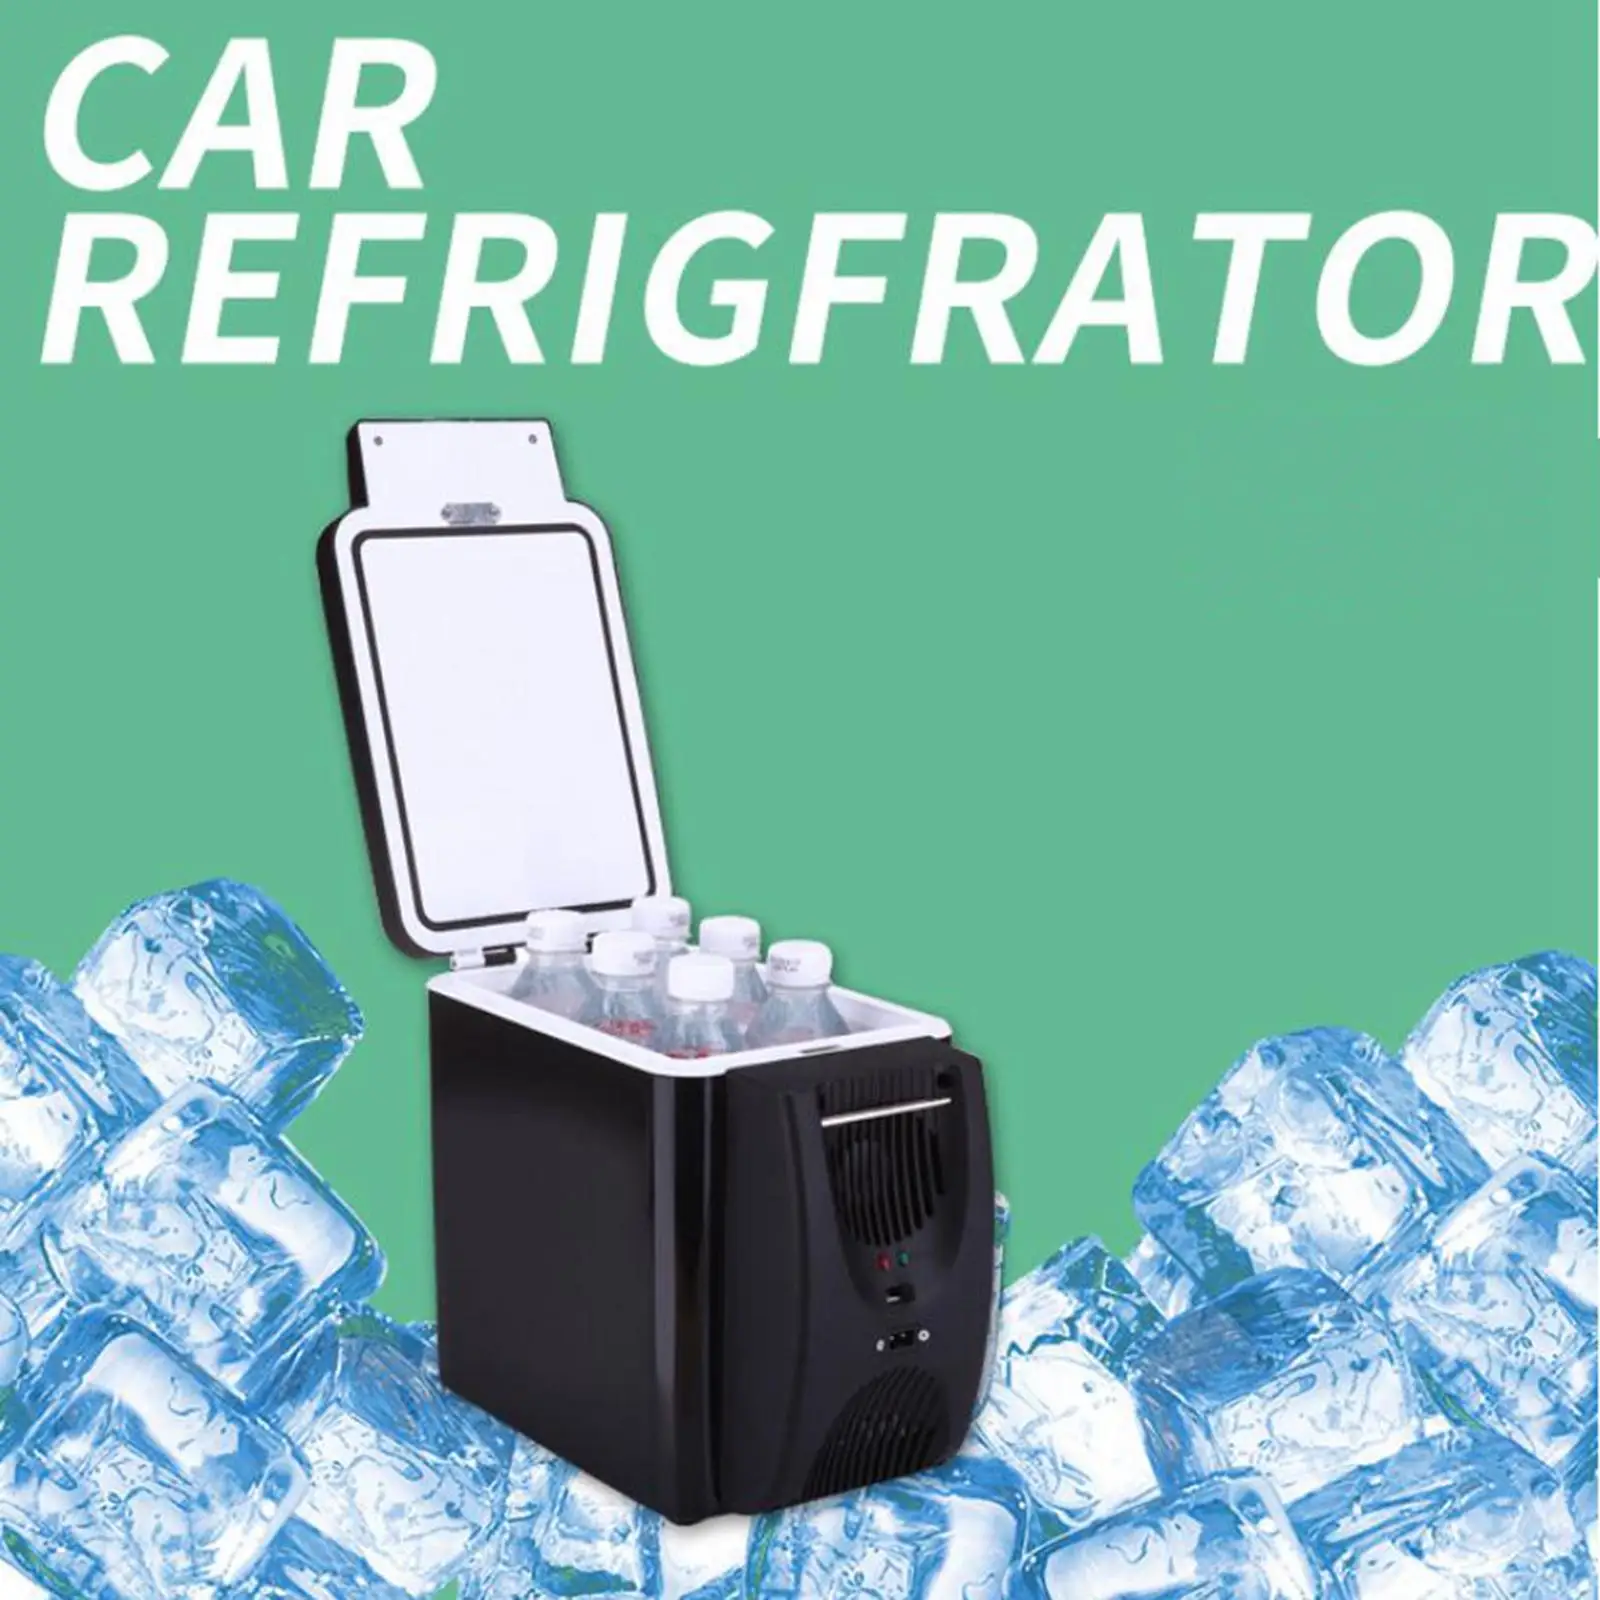 6 Liter Mini Fridge, Dual Using Low  Cooler and Warmer 12 Refrigerator Car Refrigerator for Camping Cars Office Travel Skincare